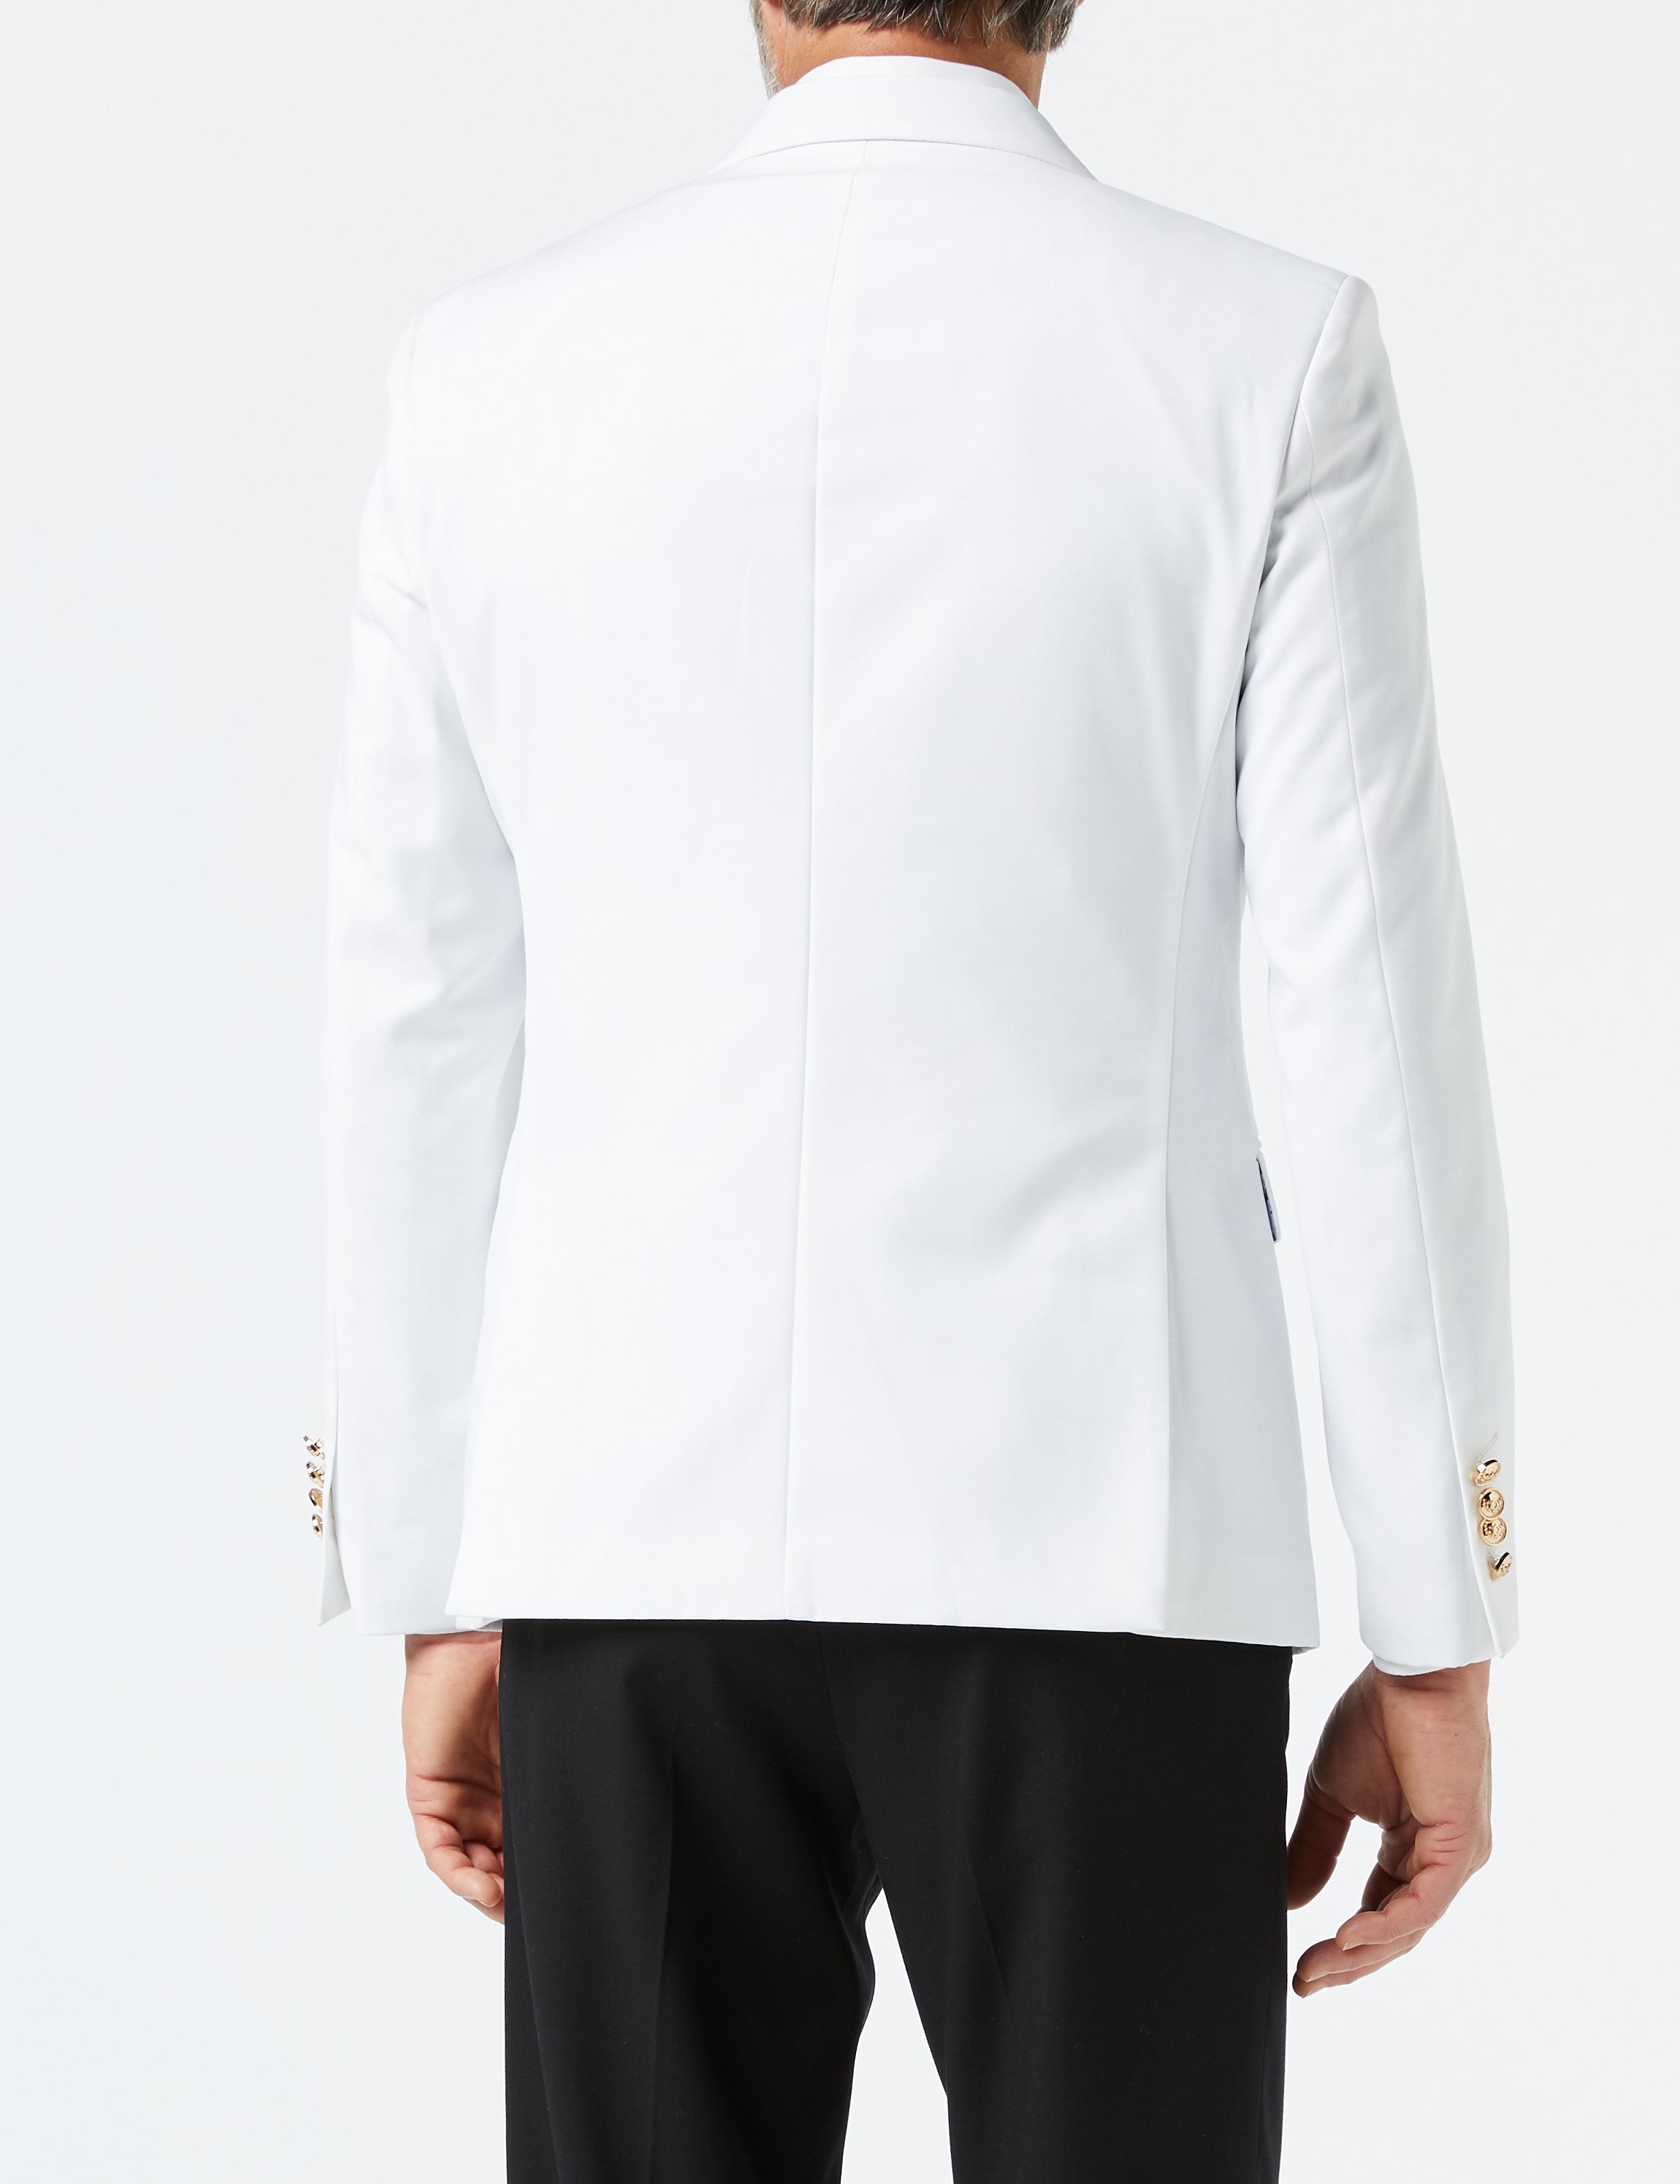 Double Breasted Gold Button White Jacket